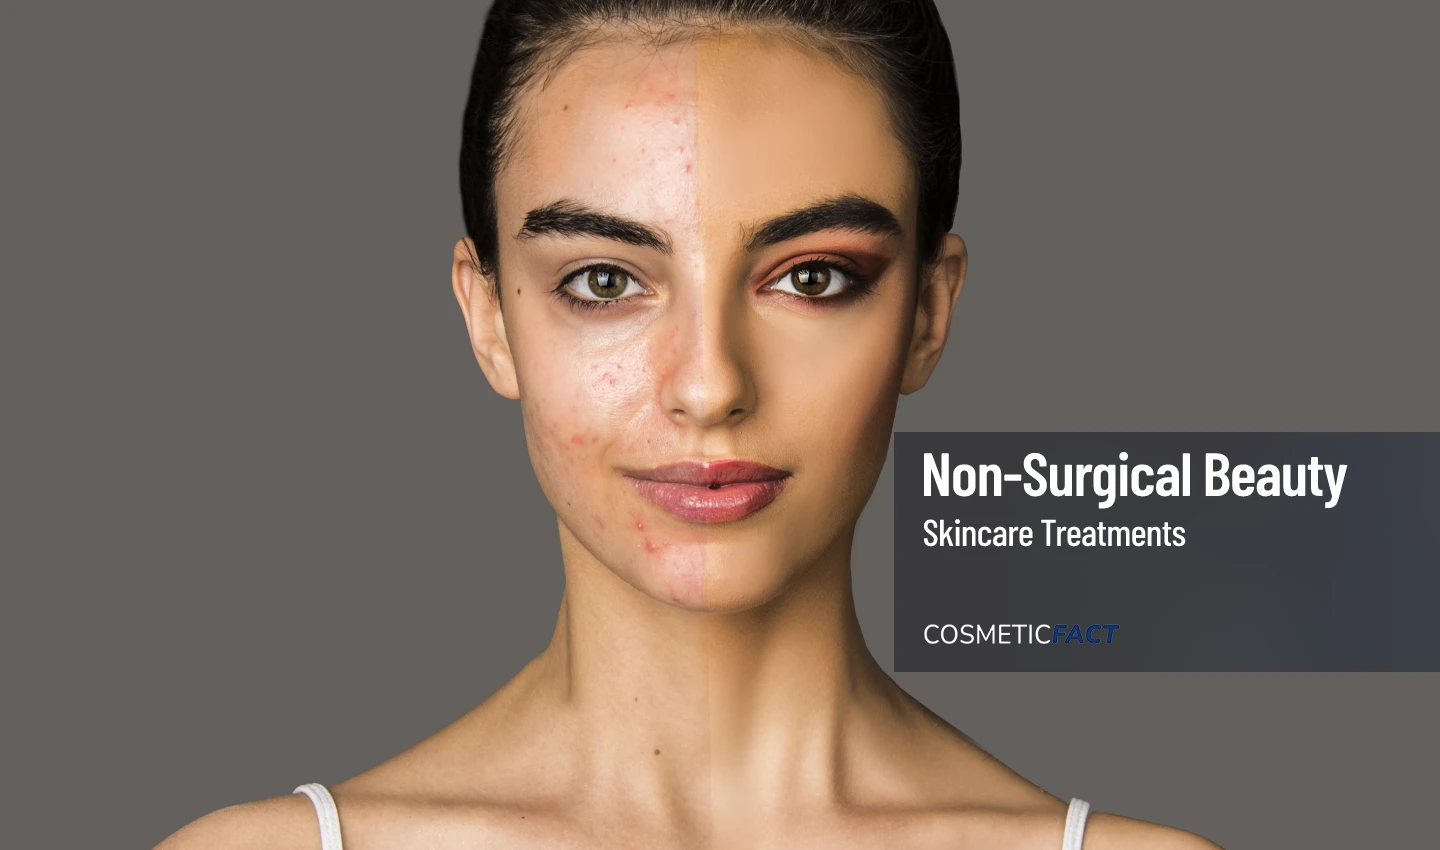 An image split in half, featuring a stunning young lady's face. One side of her face is pigmented and has no makeup, while the other side is even-colored and non-pigmented, with makeup applied. The image emphasizes the effects of hyperpigmentation and the importance of achieving clear and even skin.